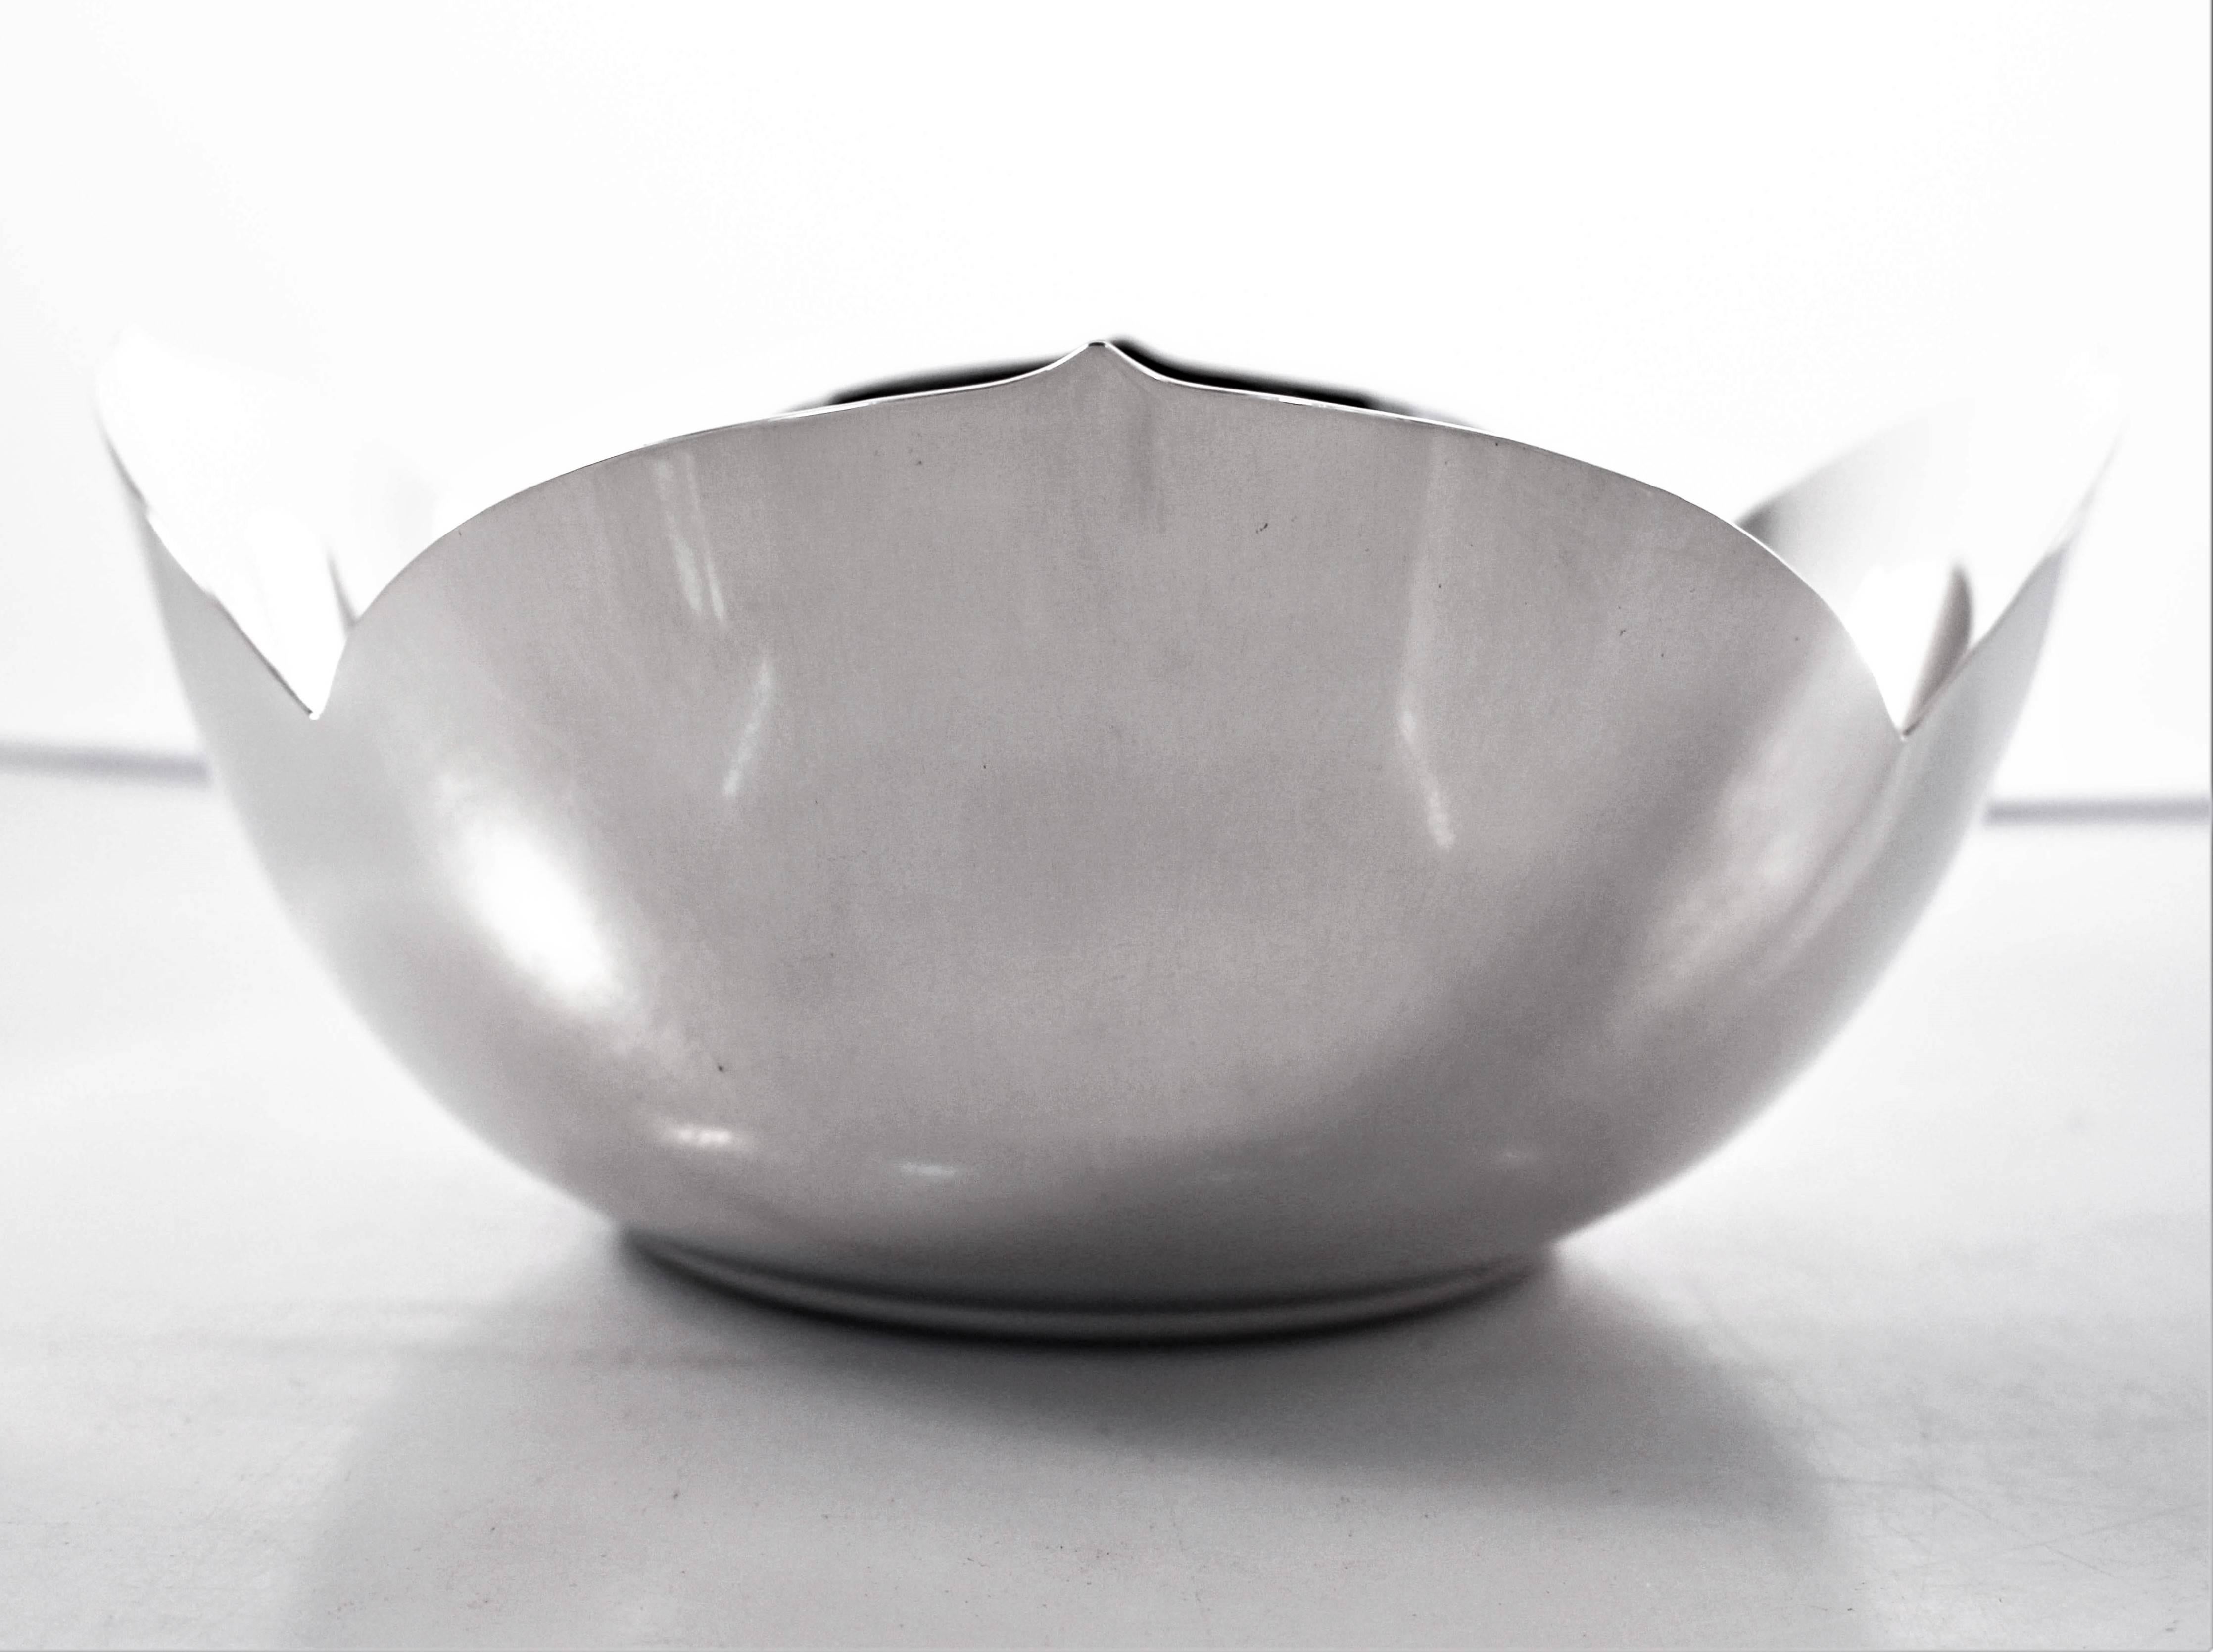 Considered one of the greatest silversmith, Tiffany & Company hollowware is known for its chic designs and its heavy weight. Here we have a midcentury sleek bowl with four pointed tips. It looks like an open flower with its leaf-like design. The